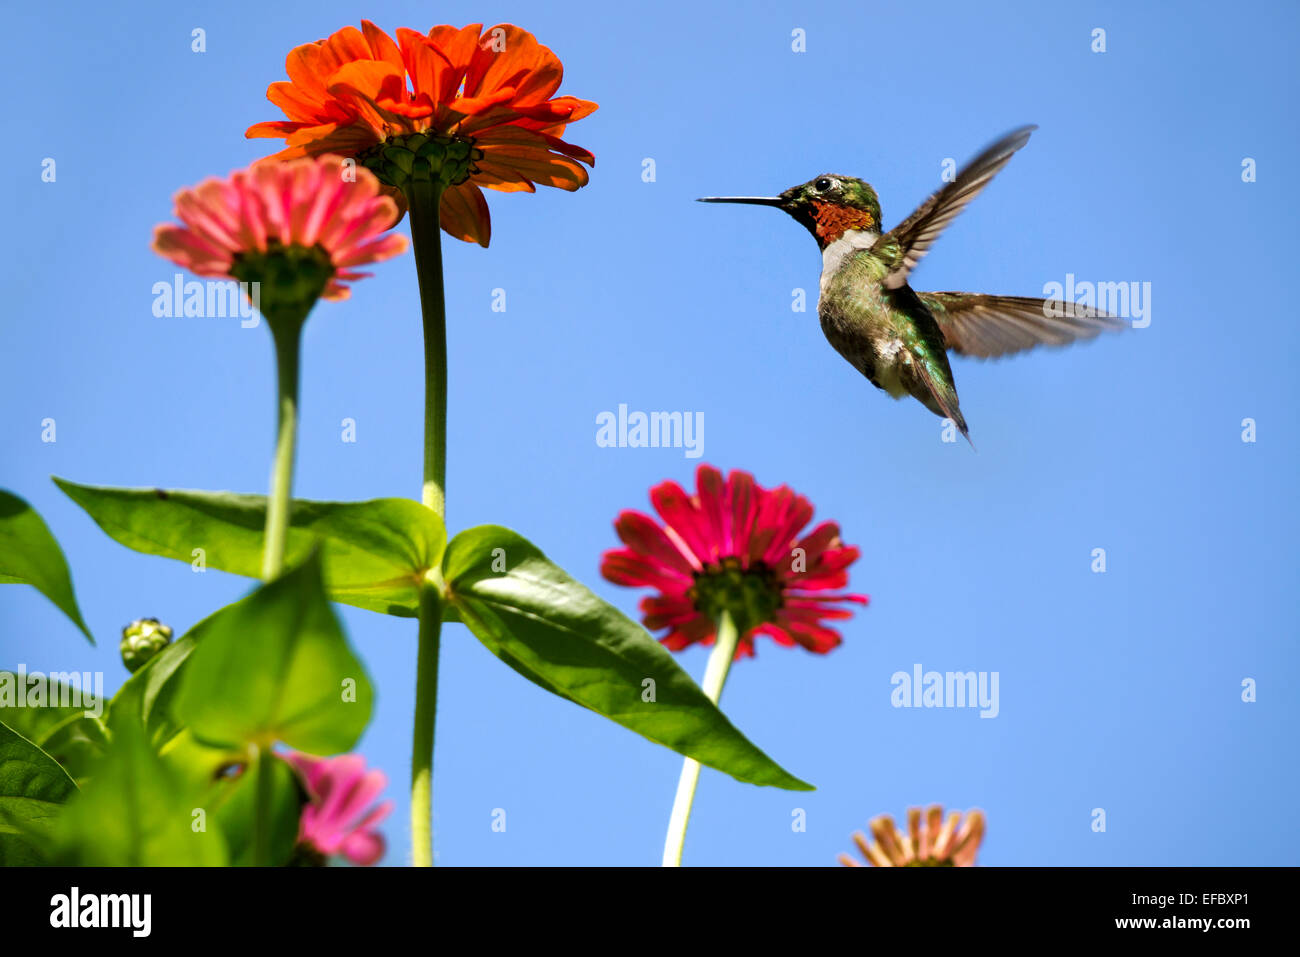 Hummingbird flying in summer garden with colorful zinnia flowers. Stock Photo